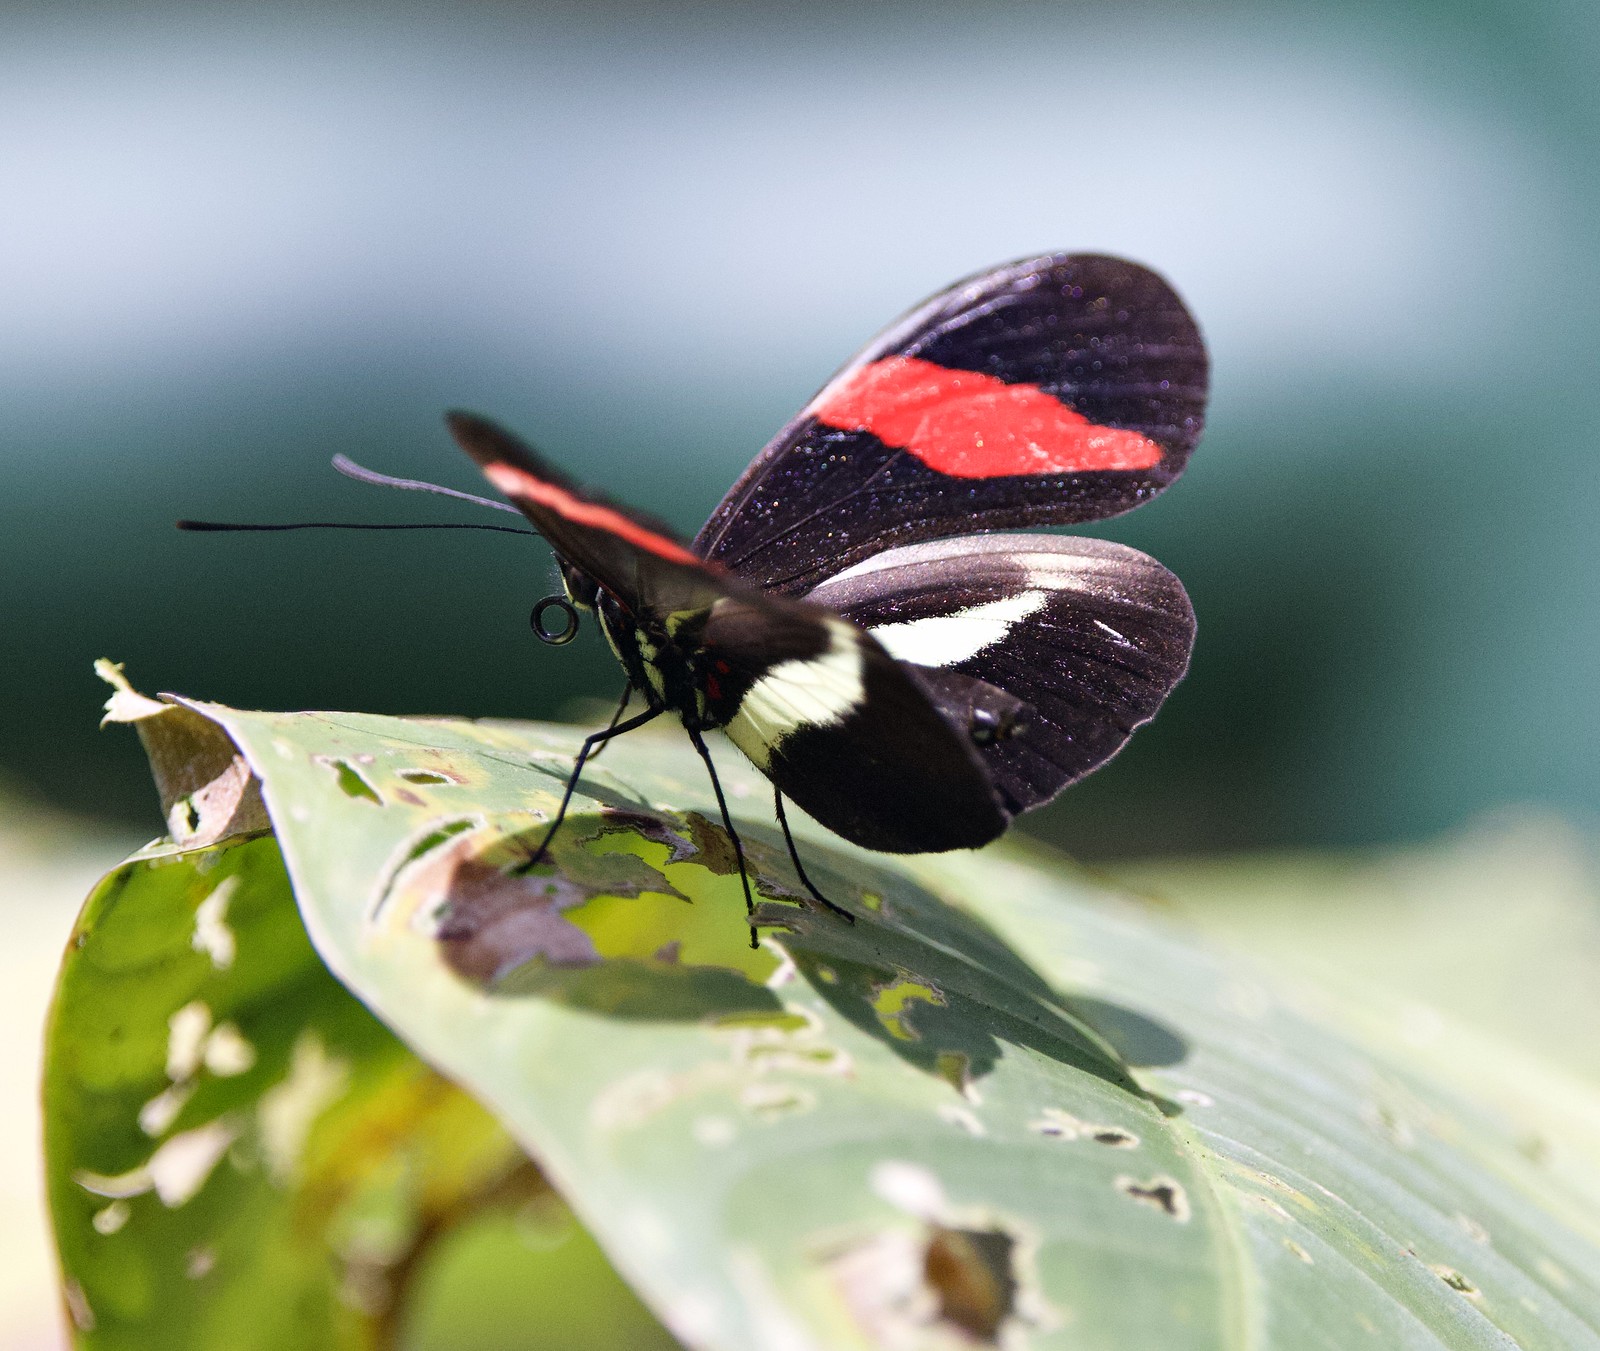 Heliconius numata butterfly on a leaf